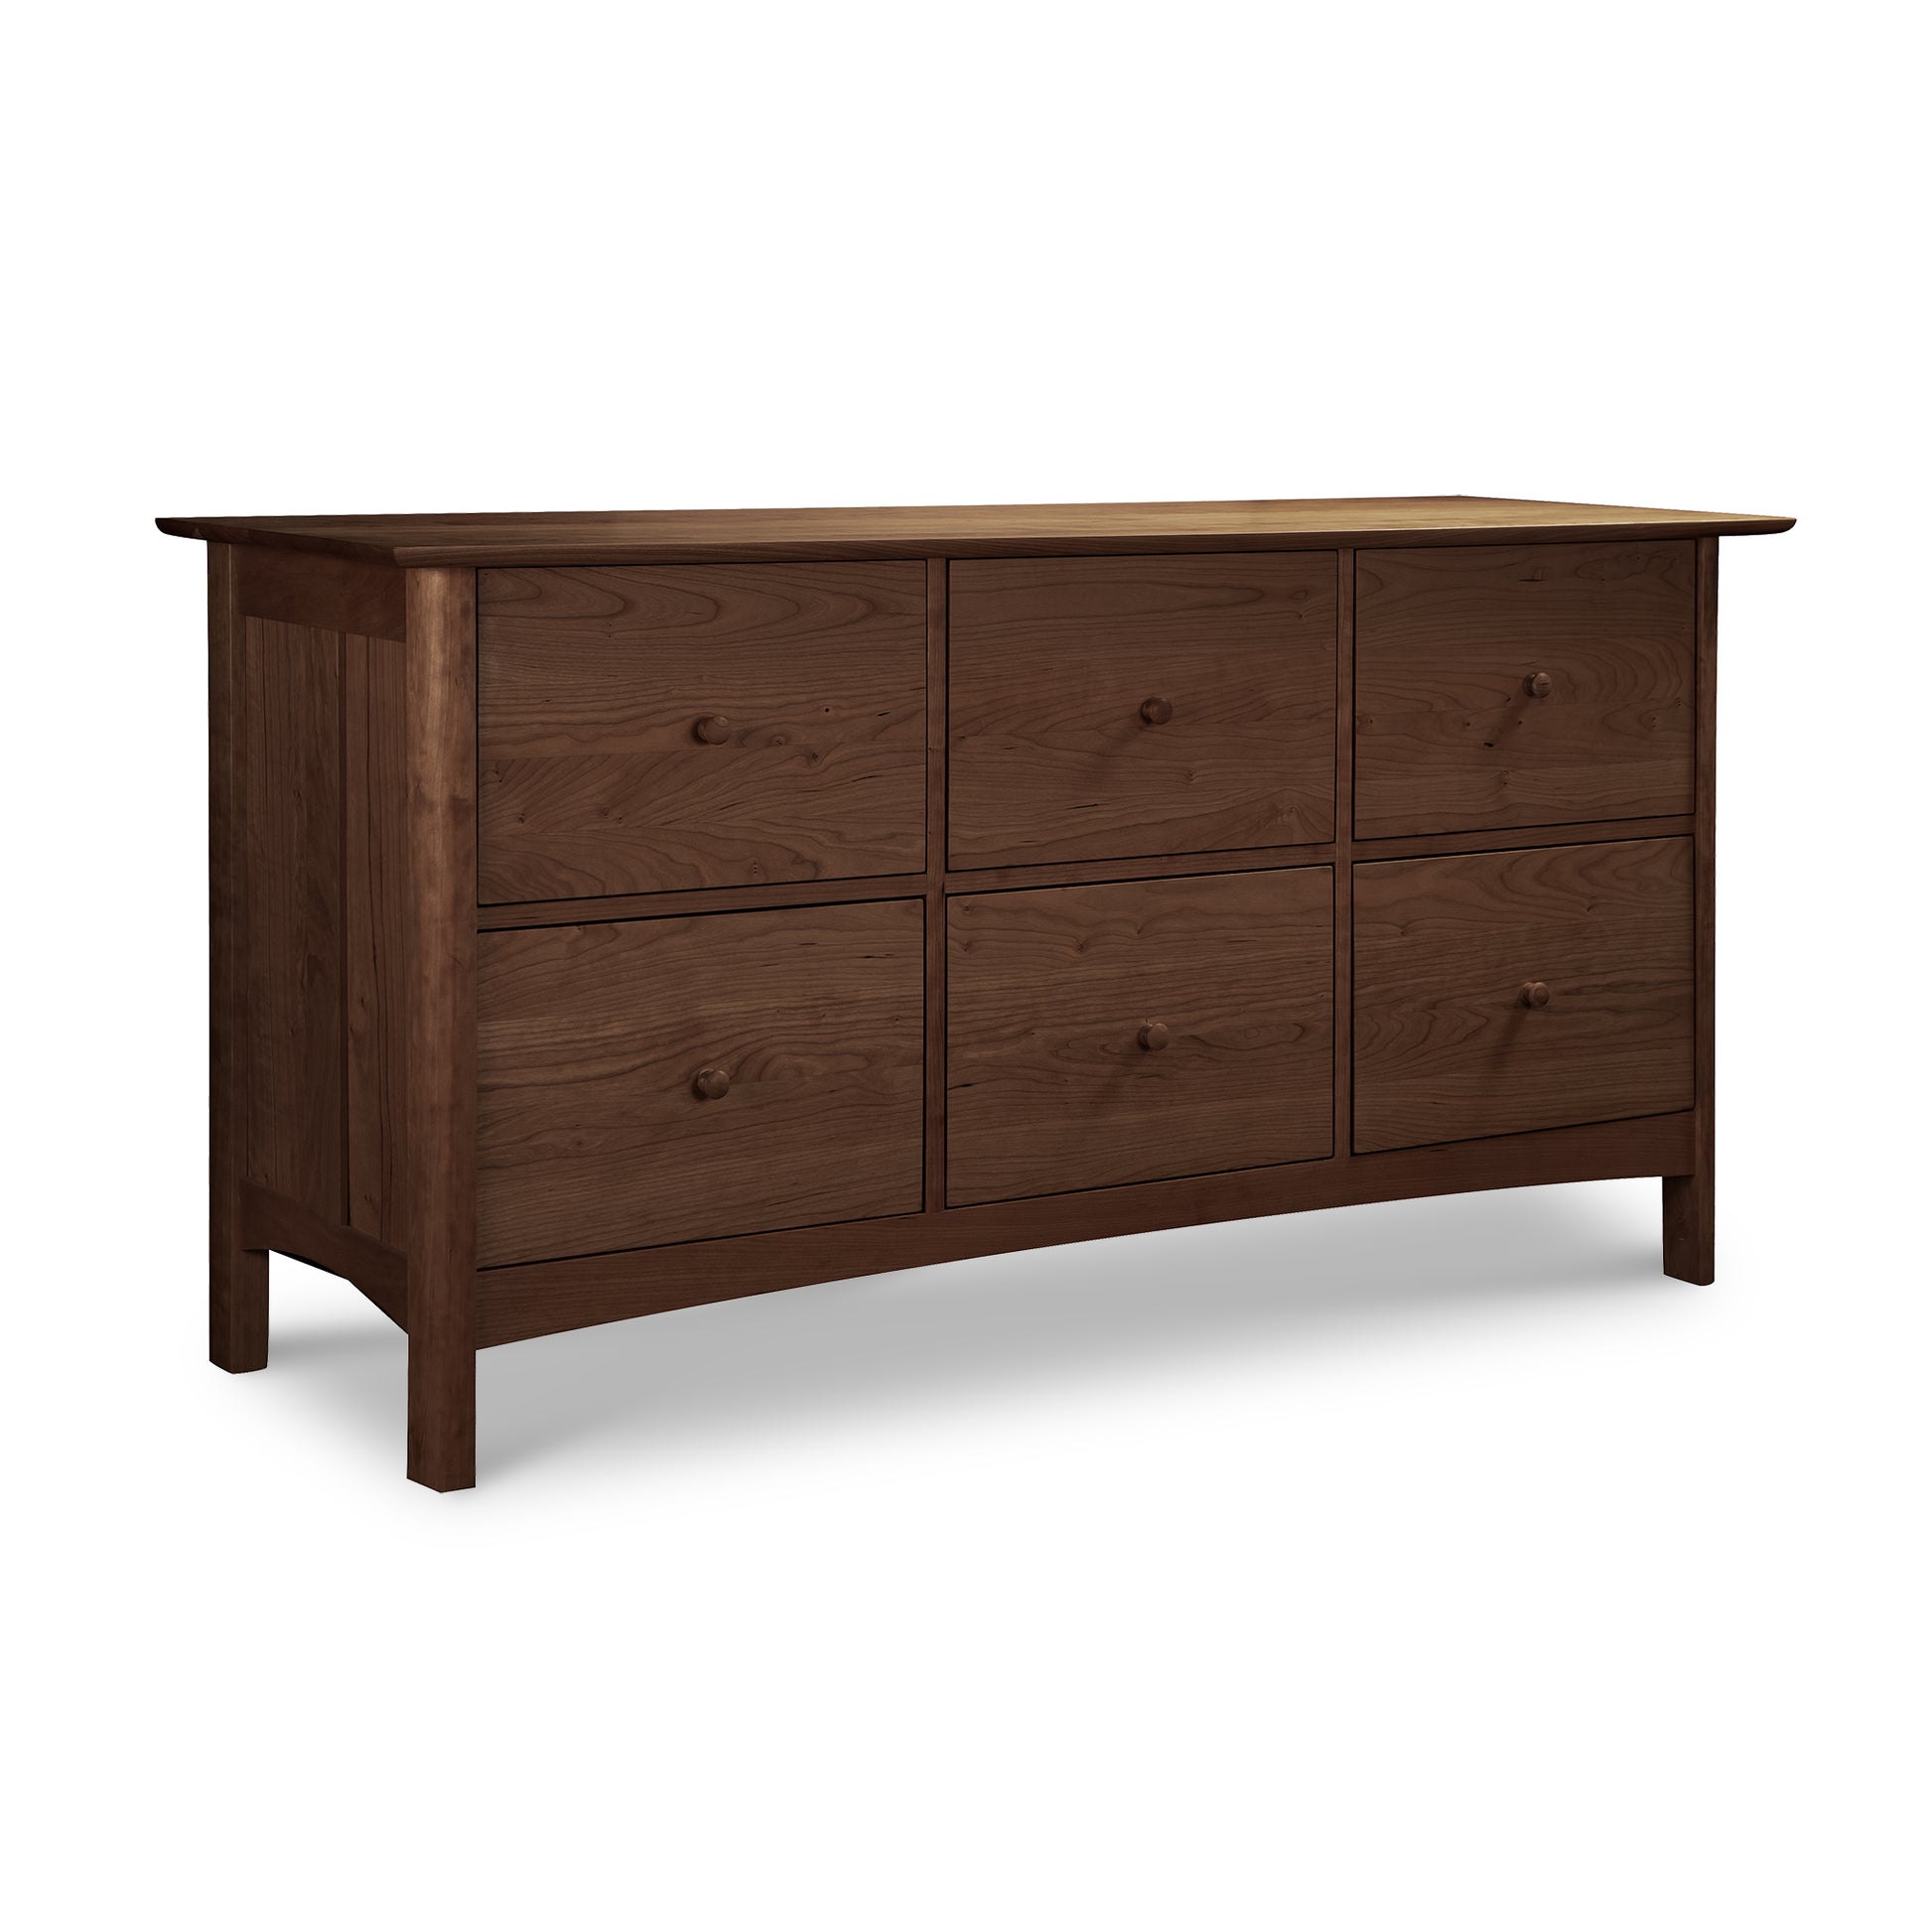 A Heartwood Shaker 6-Drawer Legal File Cabinet in a traditional style with a dark brown finish by Vermont Furniture Designs.